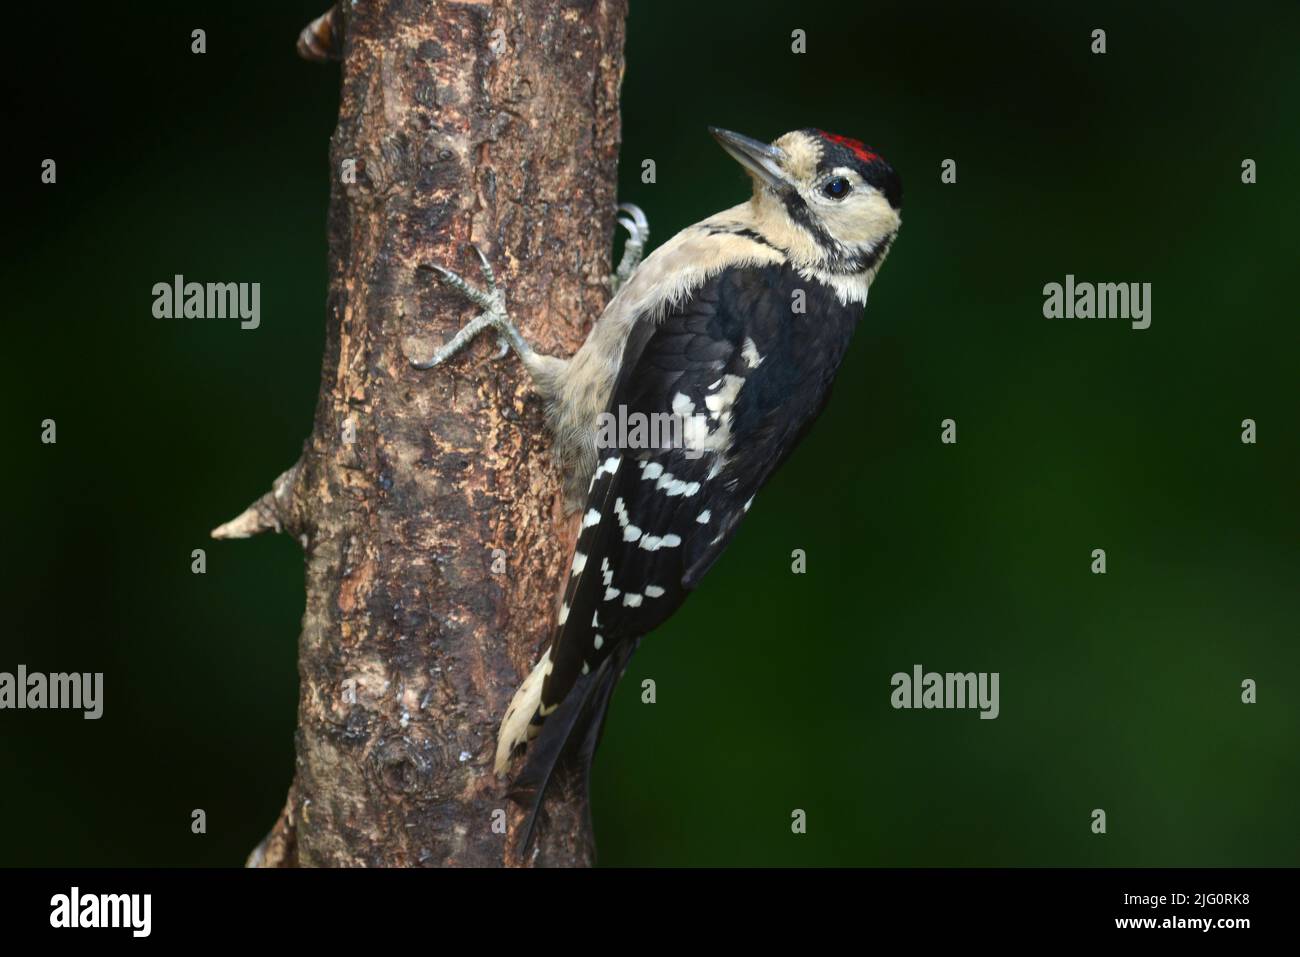 Juvenile great spotted woodpecker at rest perched on tree trunk Stock Photo